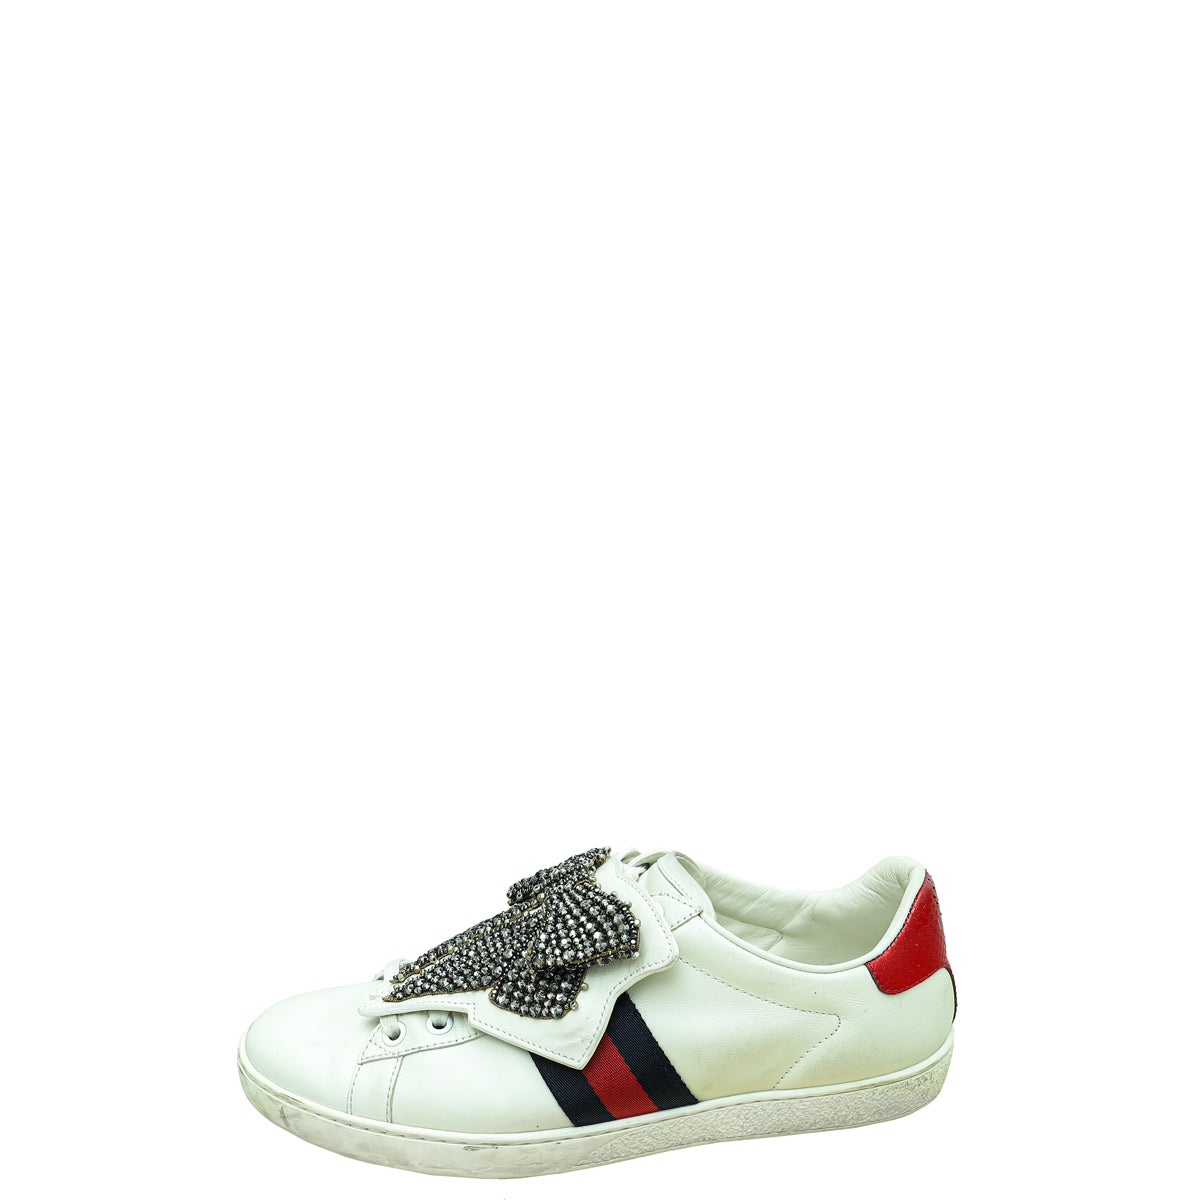 Load image into Gallery viewer, Gucci White Ace Removable Crystal Bow Sneakers 39
